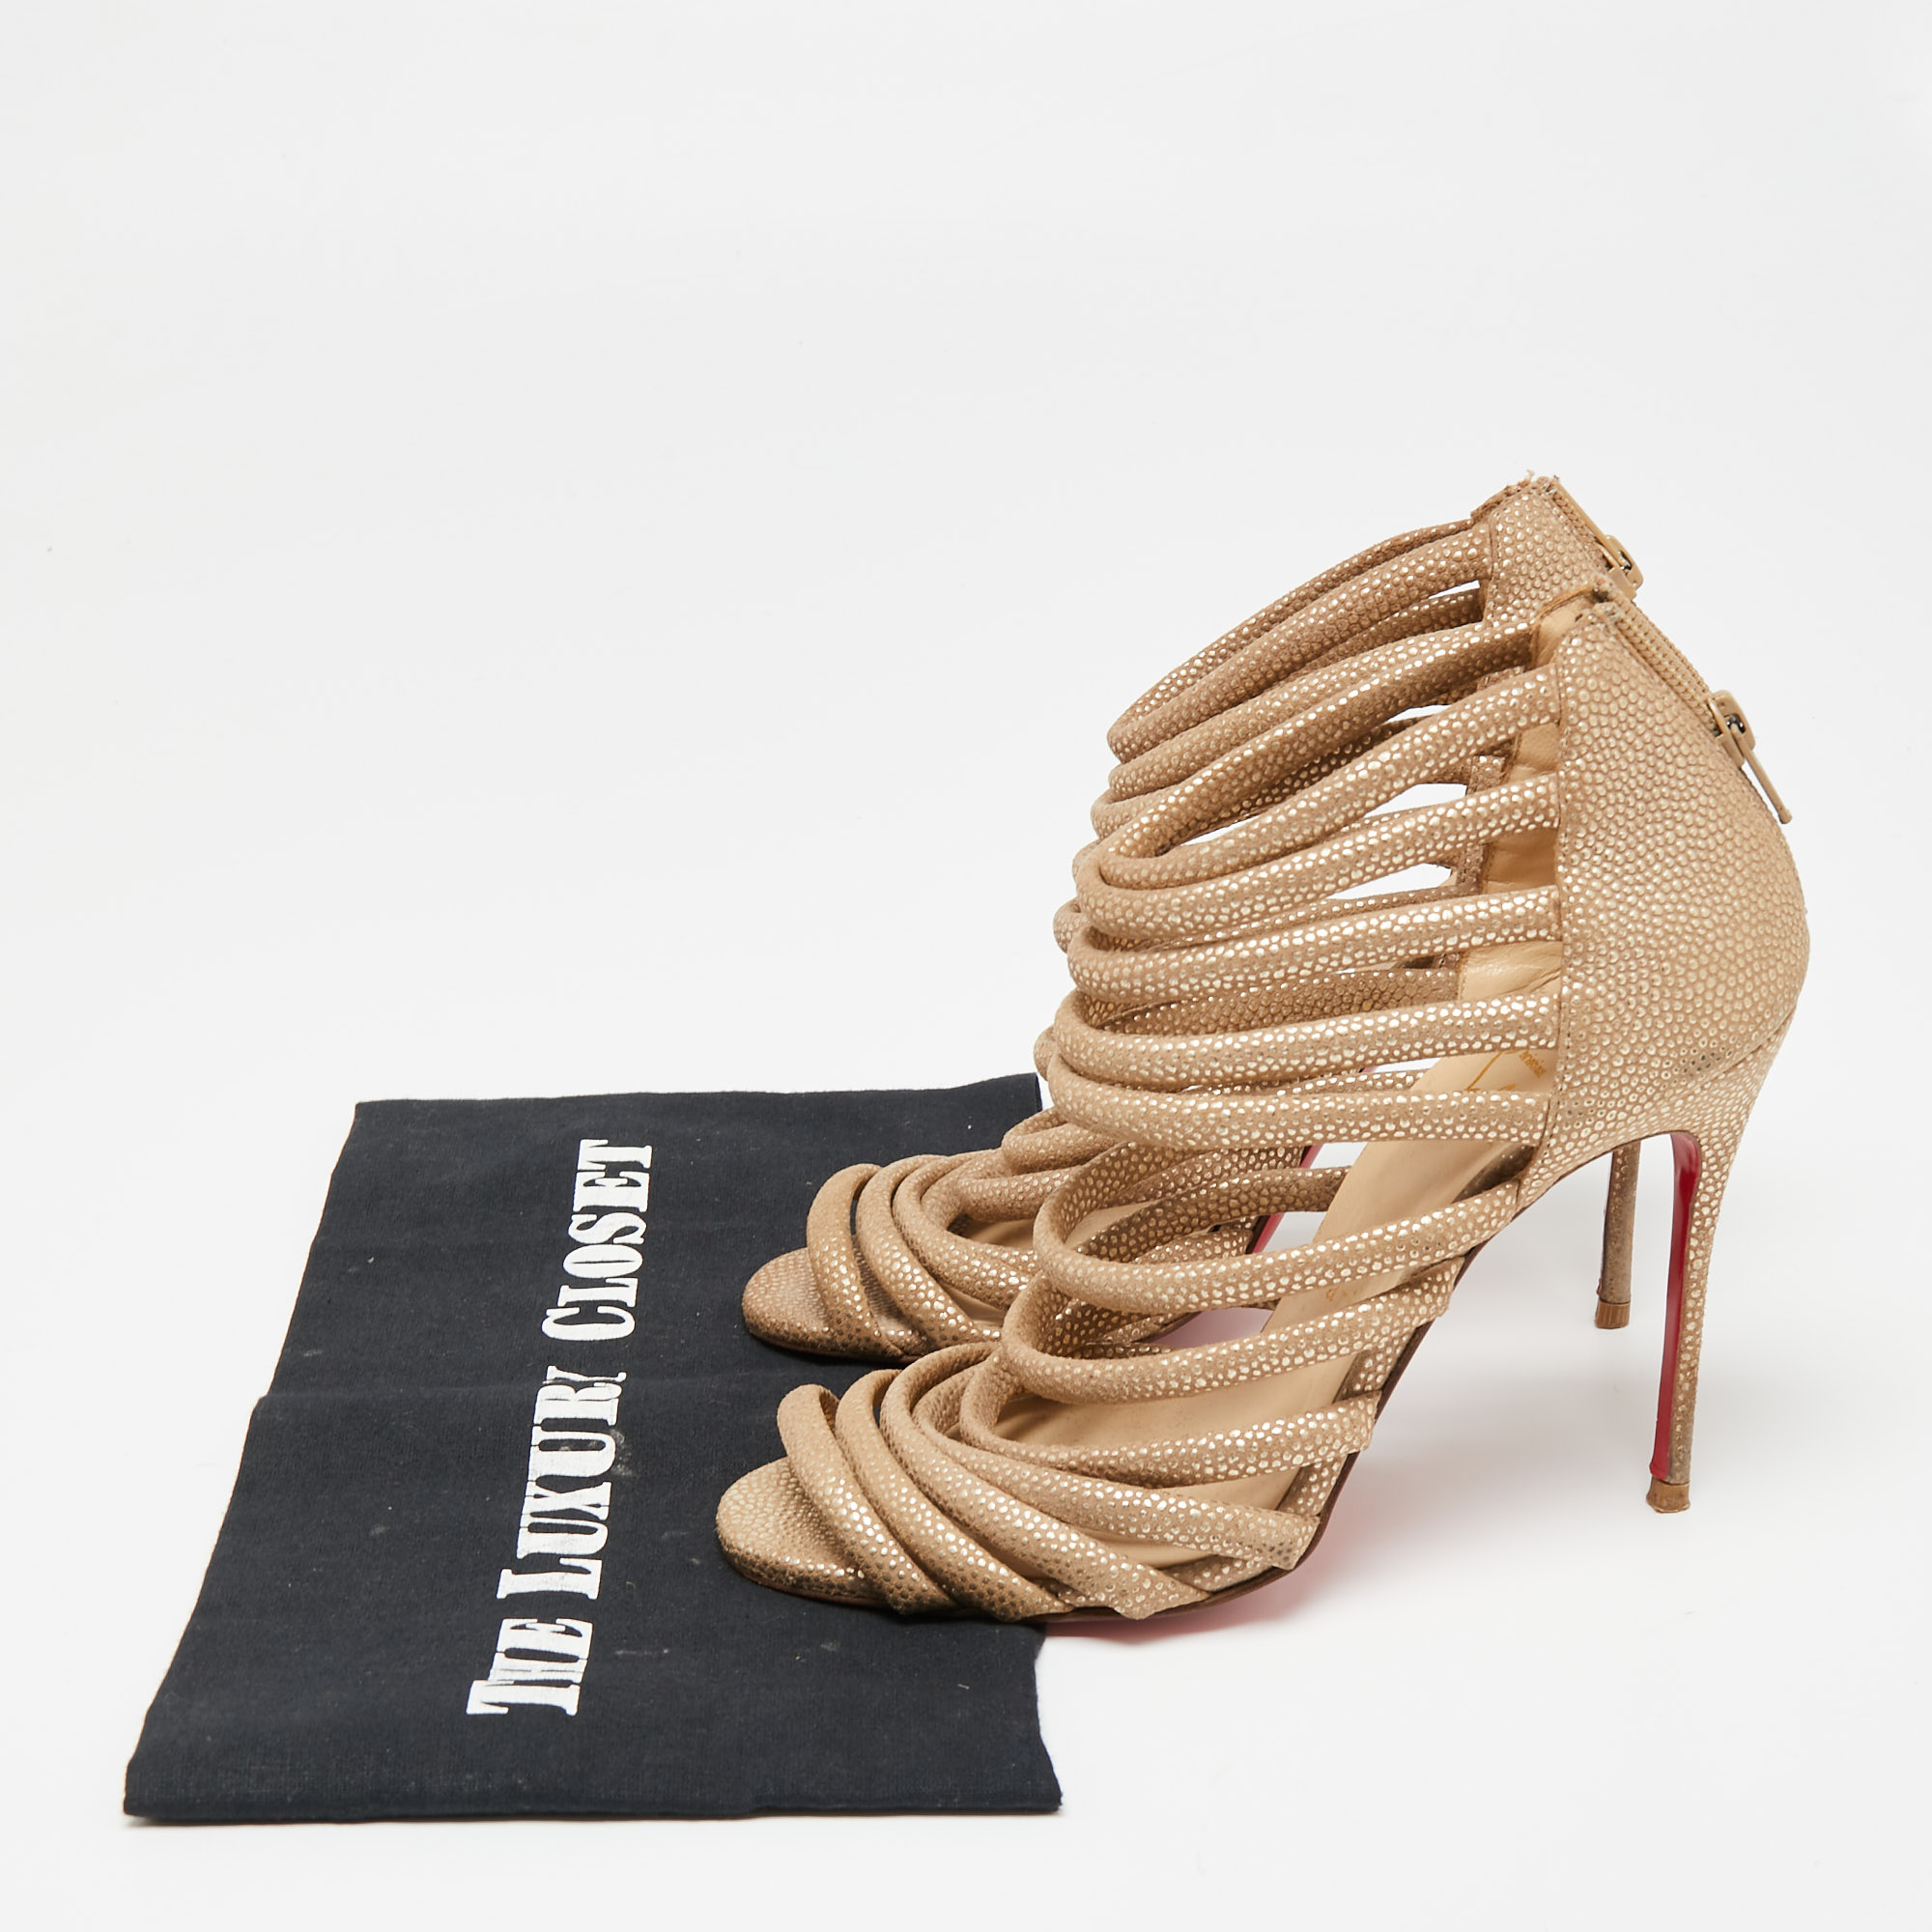 Christian Louboutin Gold/Brown Textured Suede Open-Toe Strappy Sandals Size 37